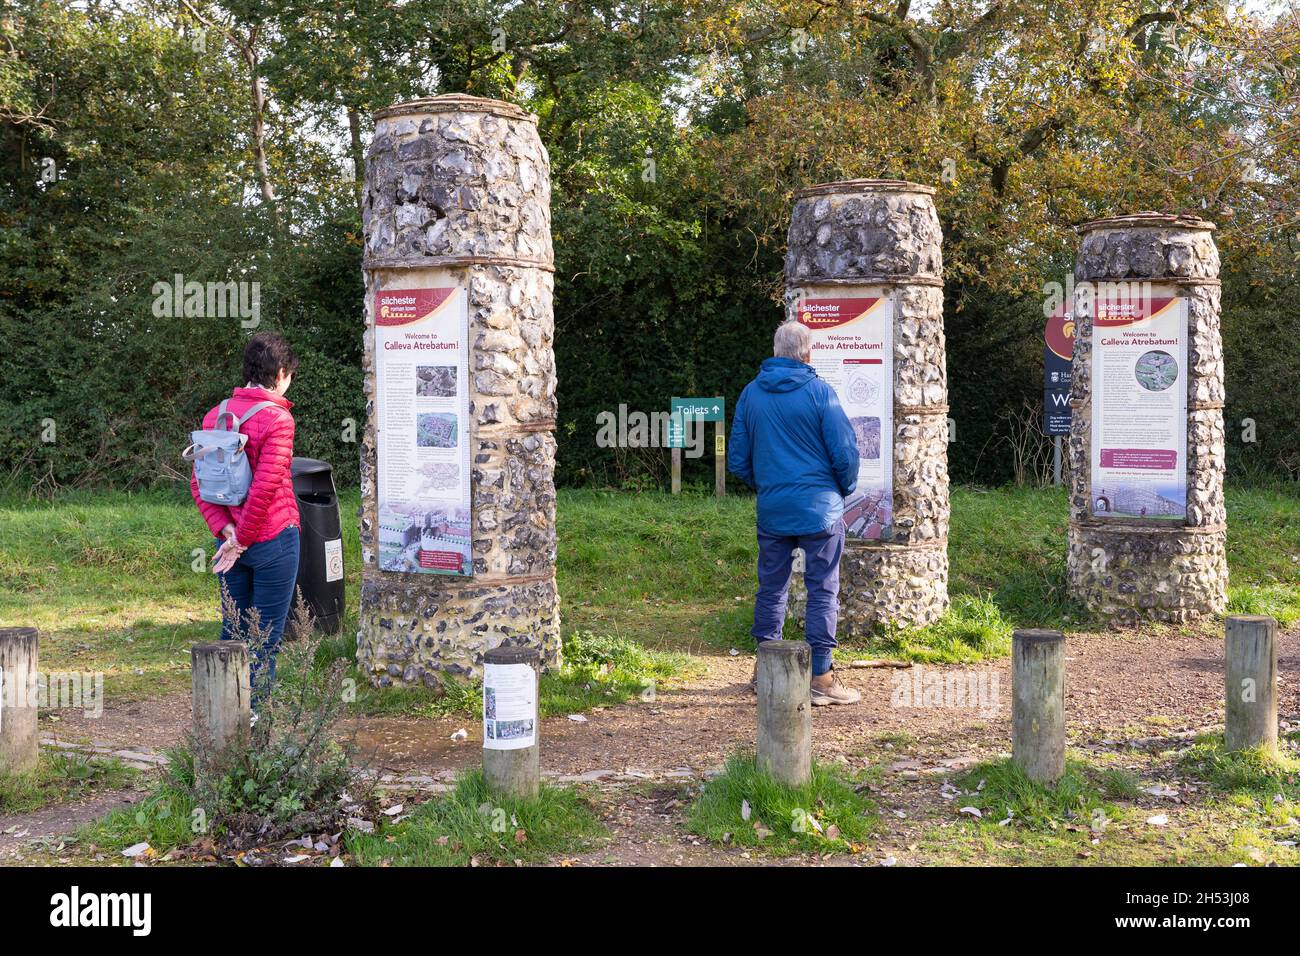 A man and a woman reading visitor information on three vertical columns about the Silchester Roman City Walls (Calleva Atrebatum). Hampshire, UK Stock Photo